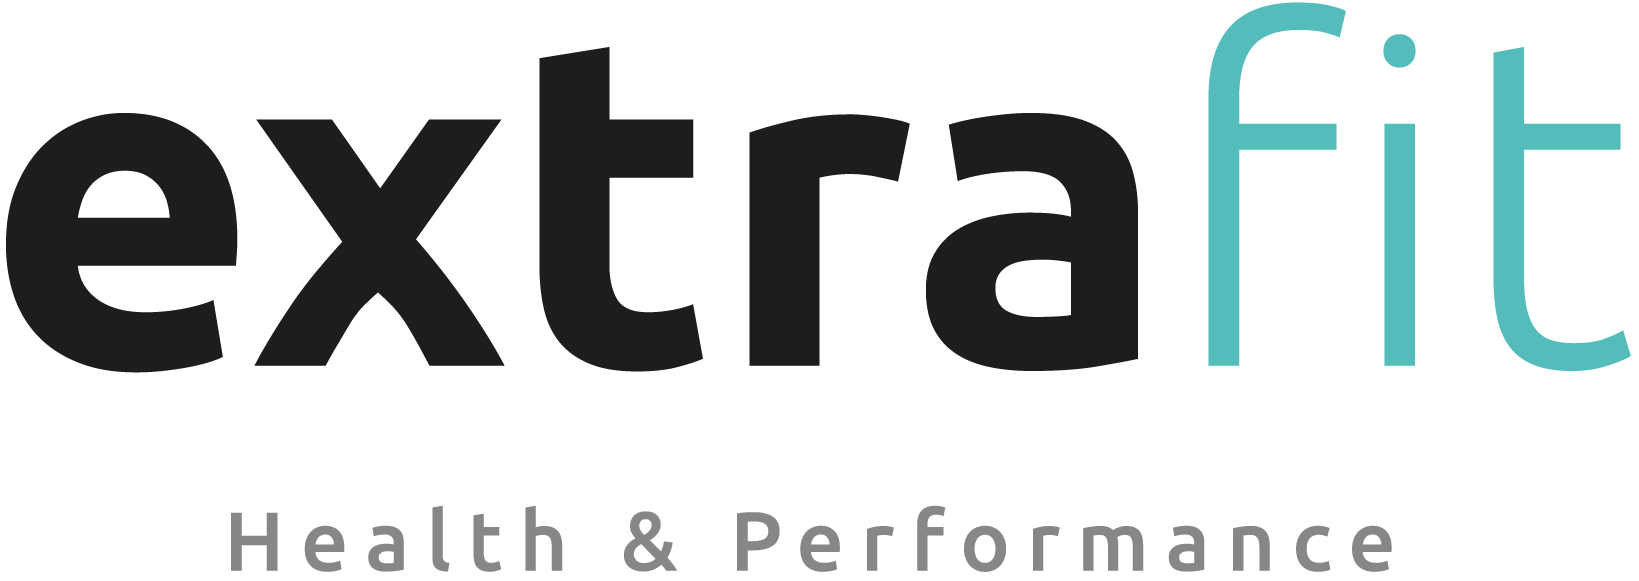 ExtraFit Health & Performance Clinic